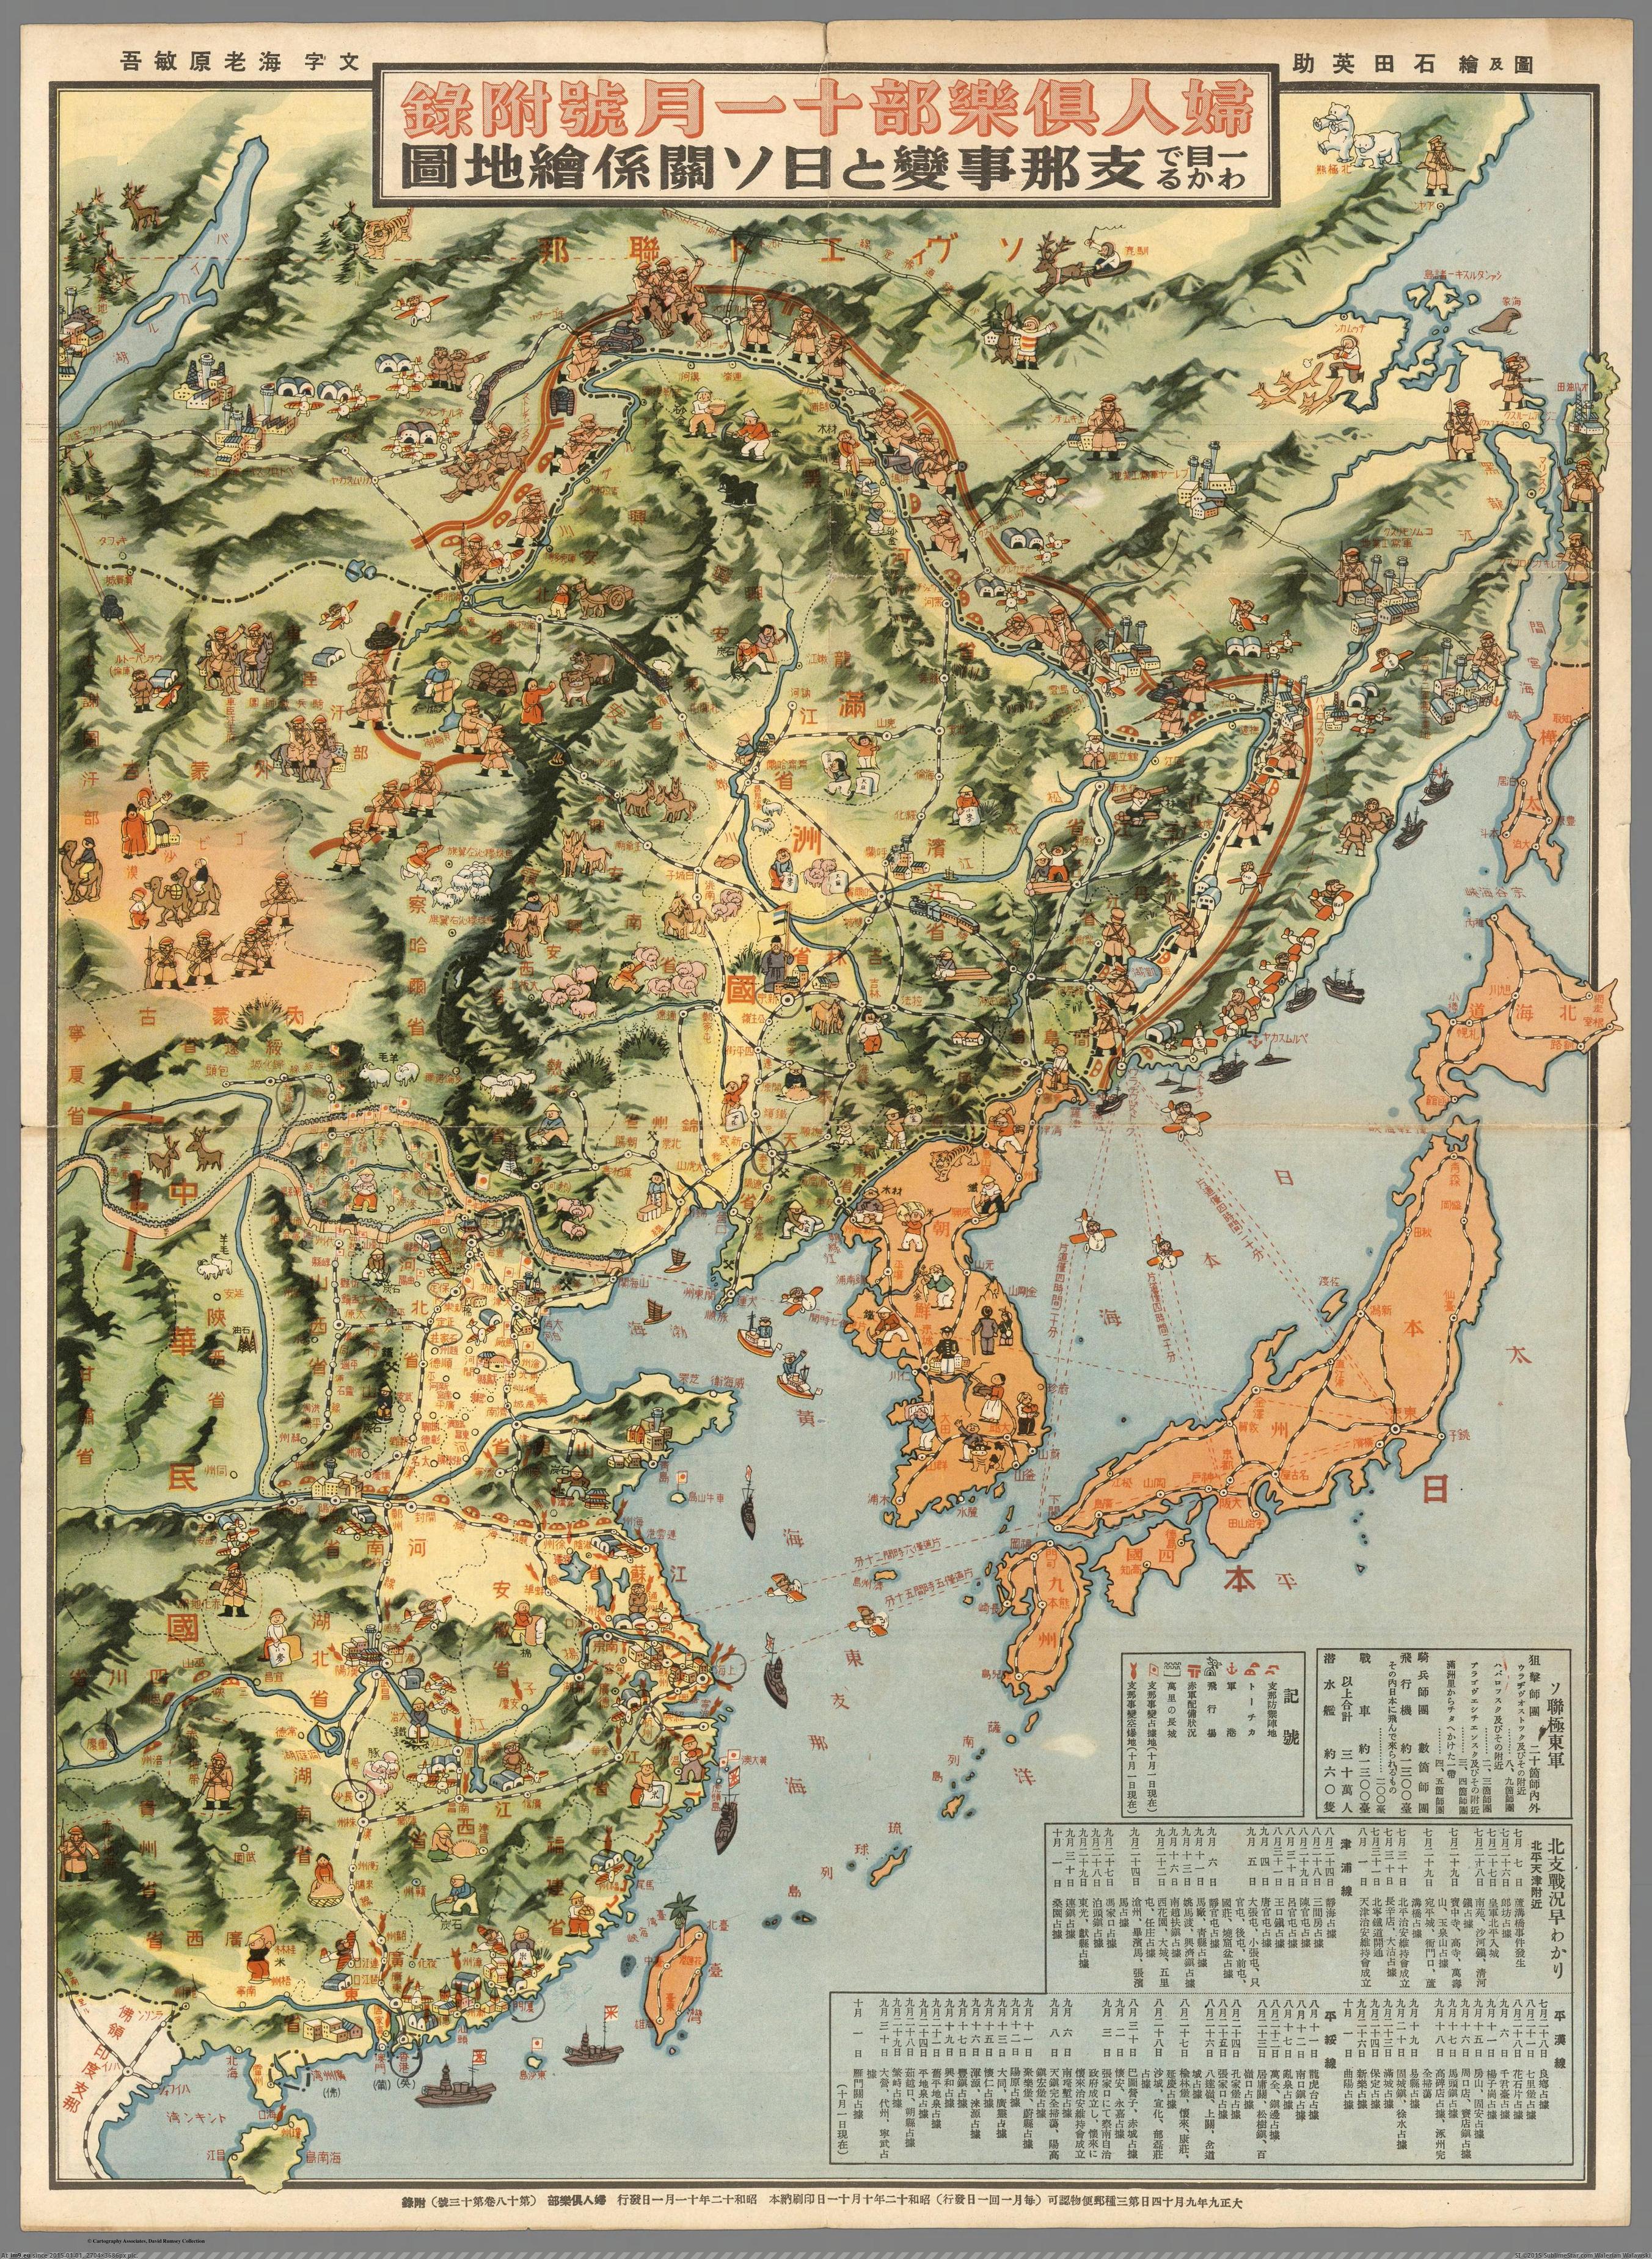 [Mapporn] Japanese Pictorial map of China and Japan-Soviet relations. (1937) [2704x3686] (in My r/MAPS favs)